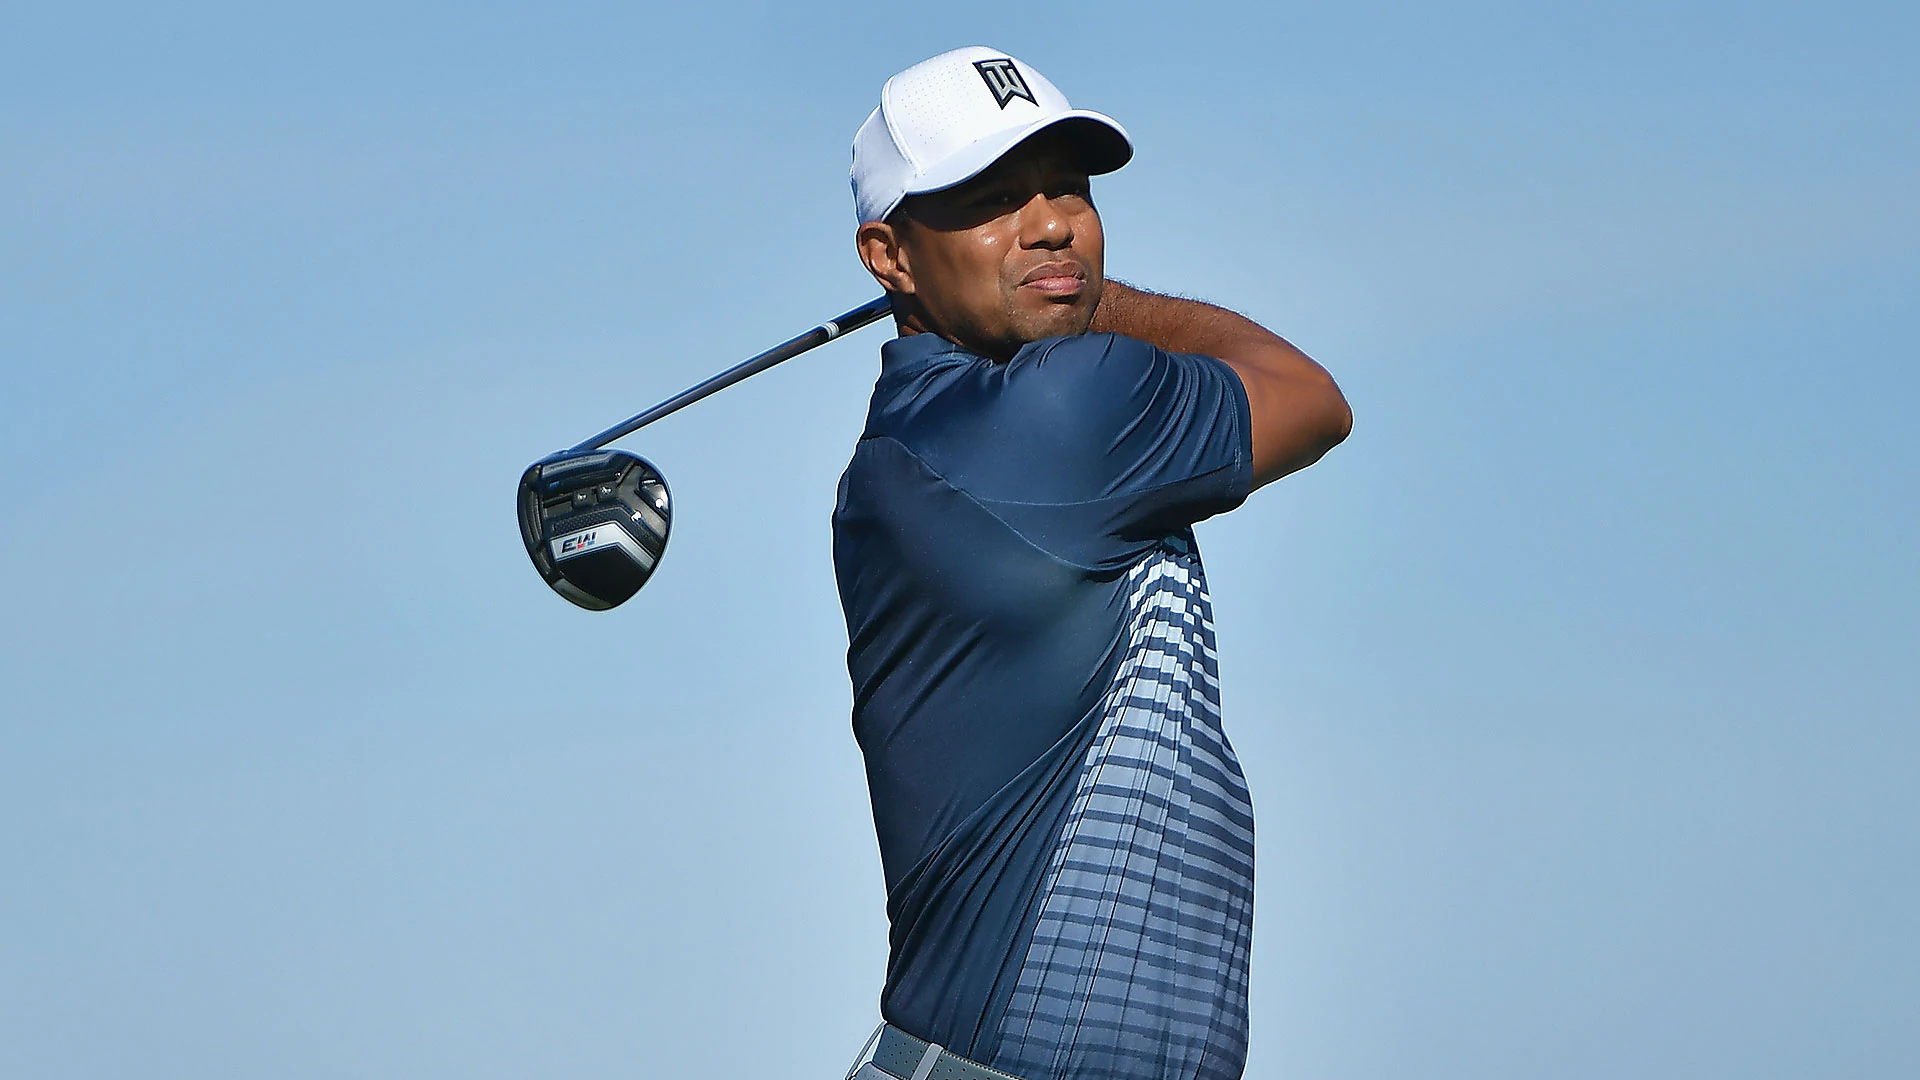 Tiger on errant driving: 'I need to fix that'